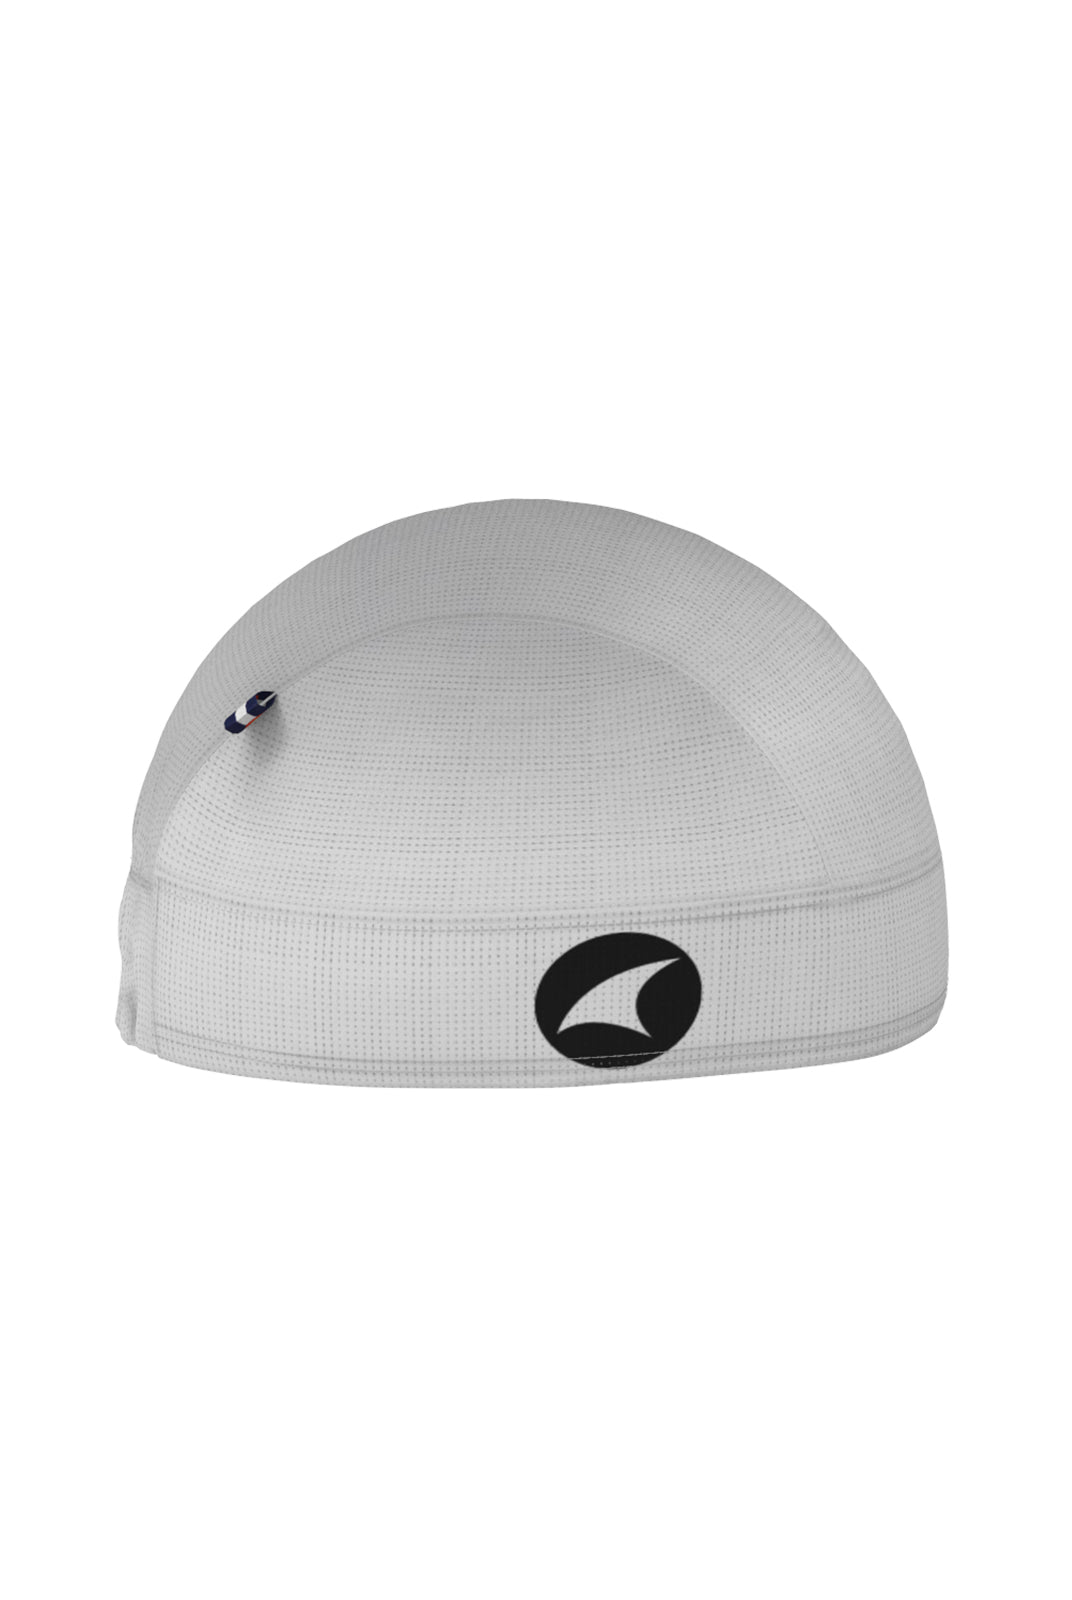 White Skull Cycling Cap - Right Side